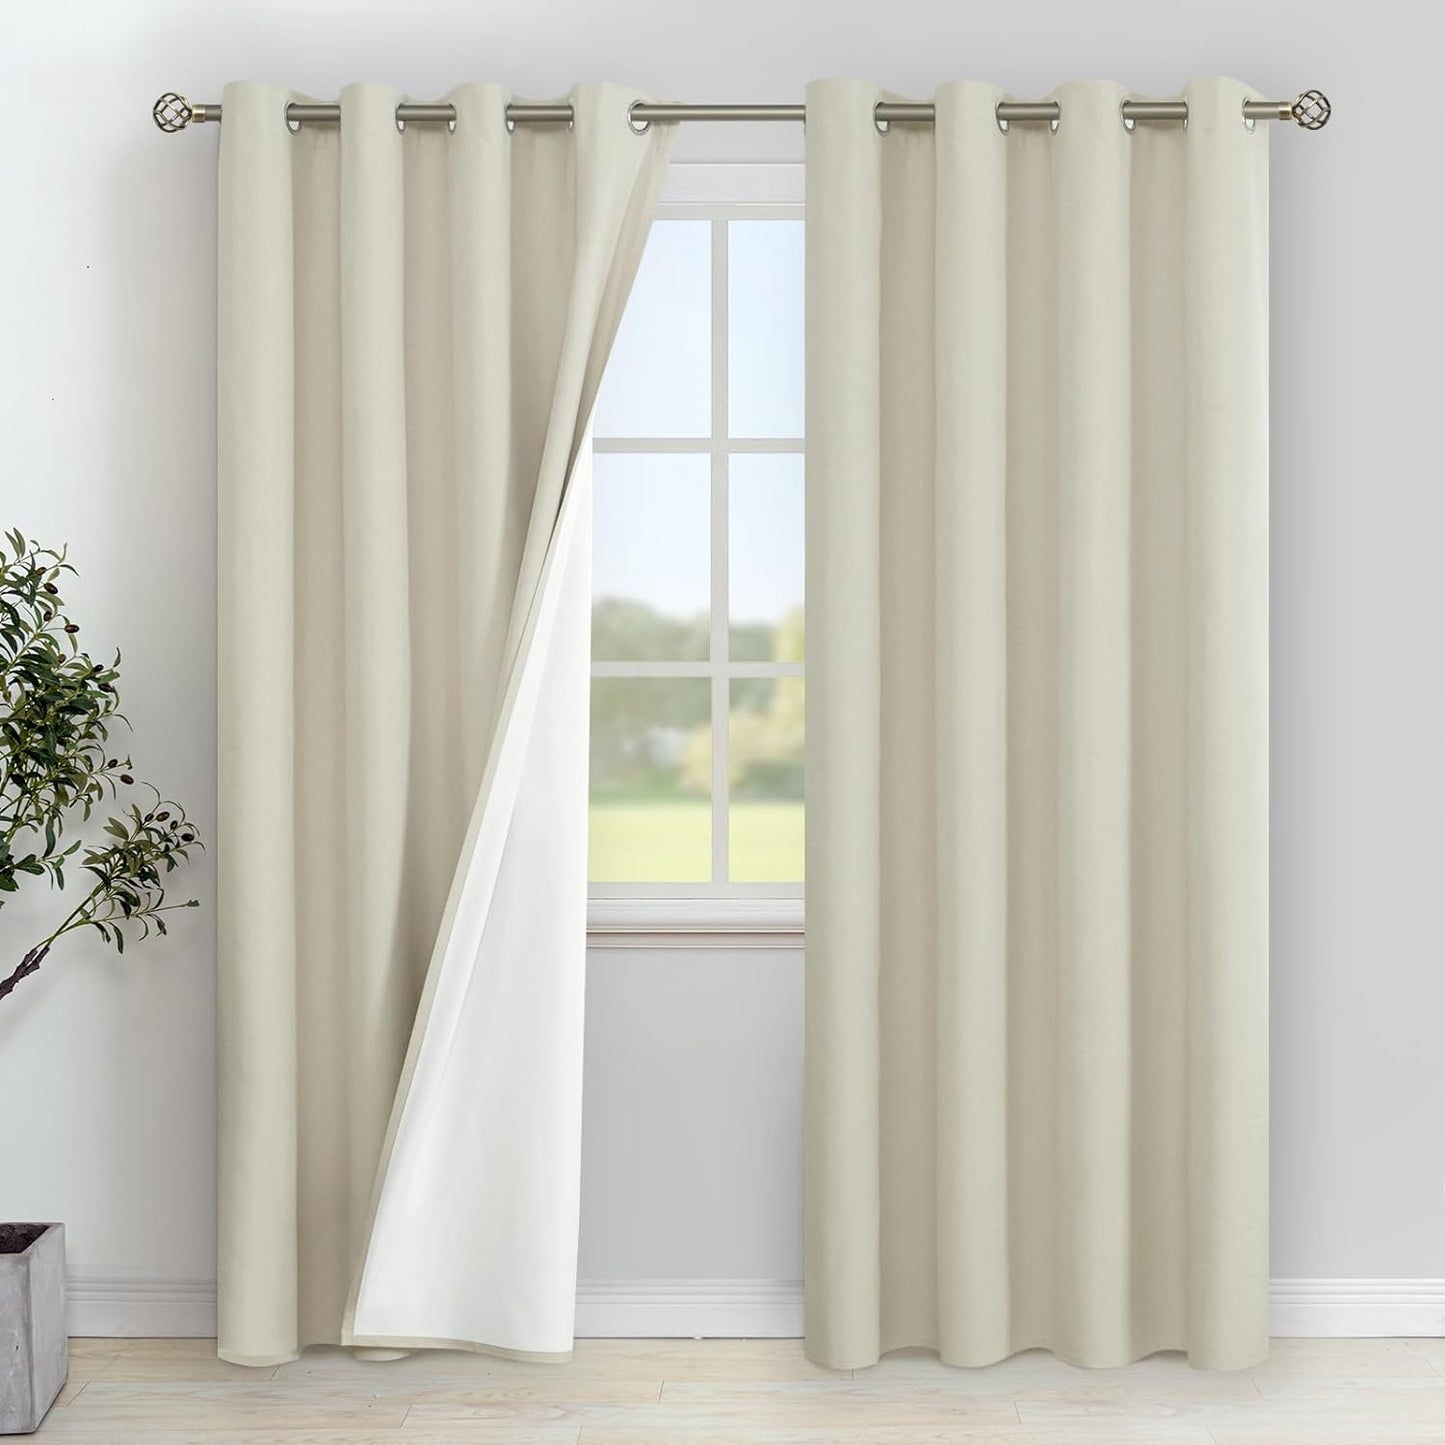 Youngstex Linen Blackout Curtains 63 Inches Long, Grommet Full Room Darkening Linen Window Drapes Thermal Insulated for Living Room Bedroom, 2 Panels, 52 X 63 Inch, Linen  YoungsTex Cream 52W X 84L 